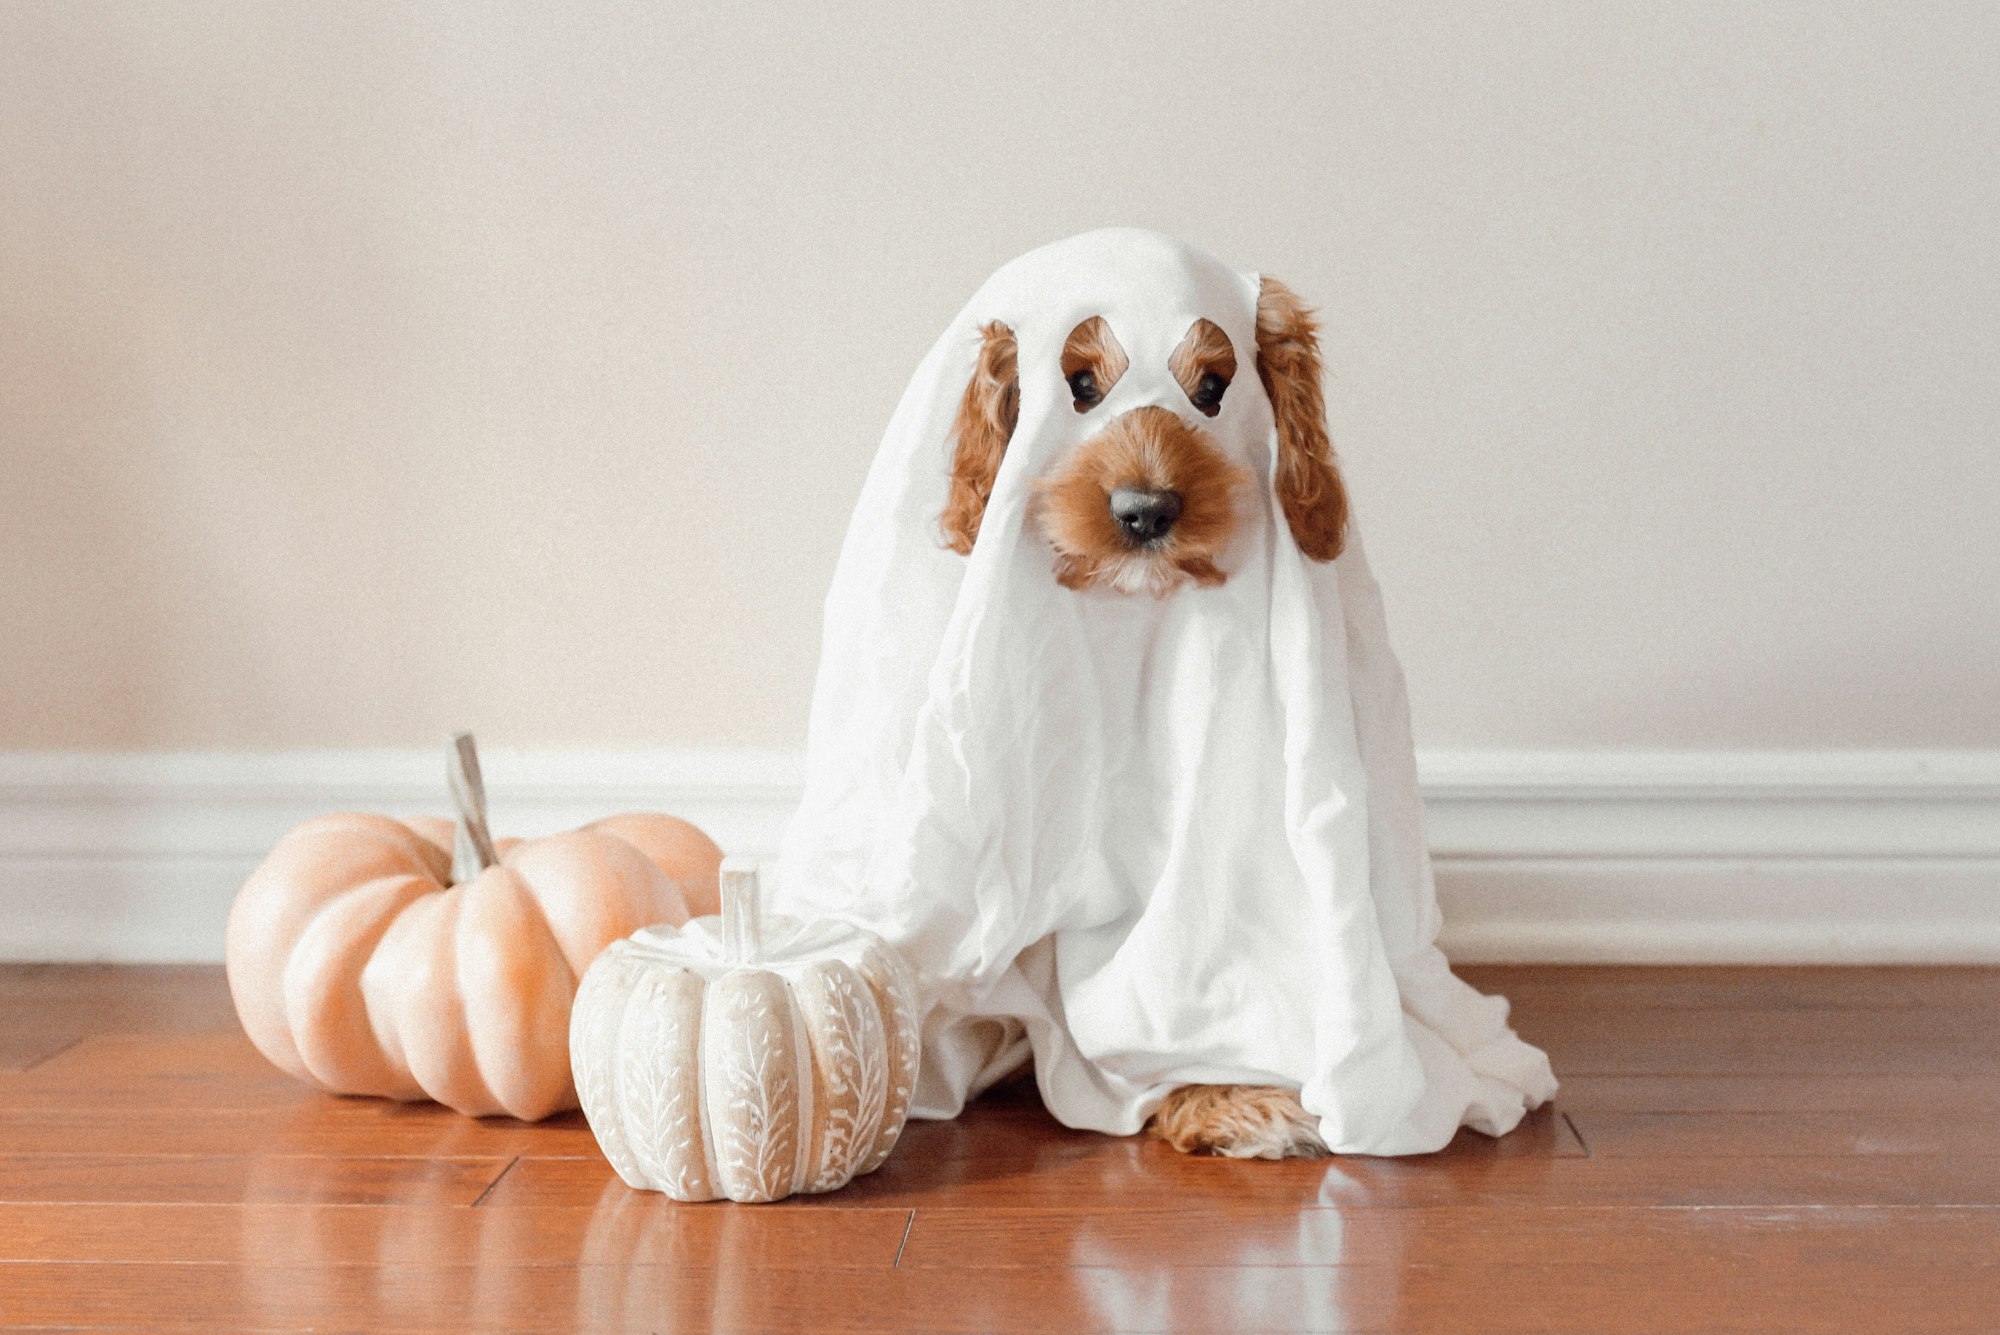 Poppy wishes everyone a happy Halloween! Follow us on Instagram for more cuteness.